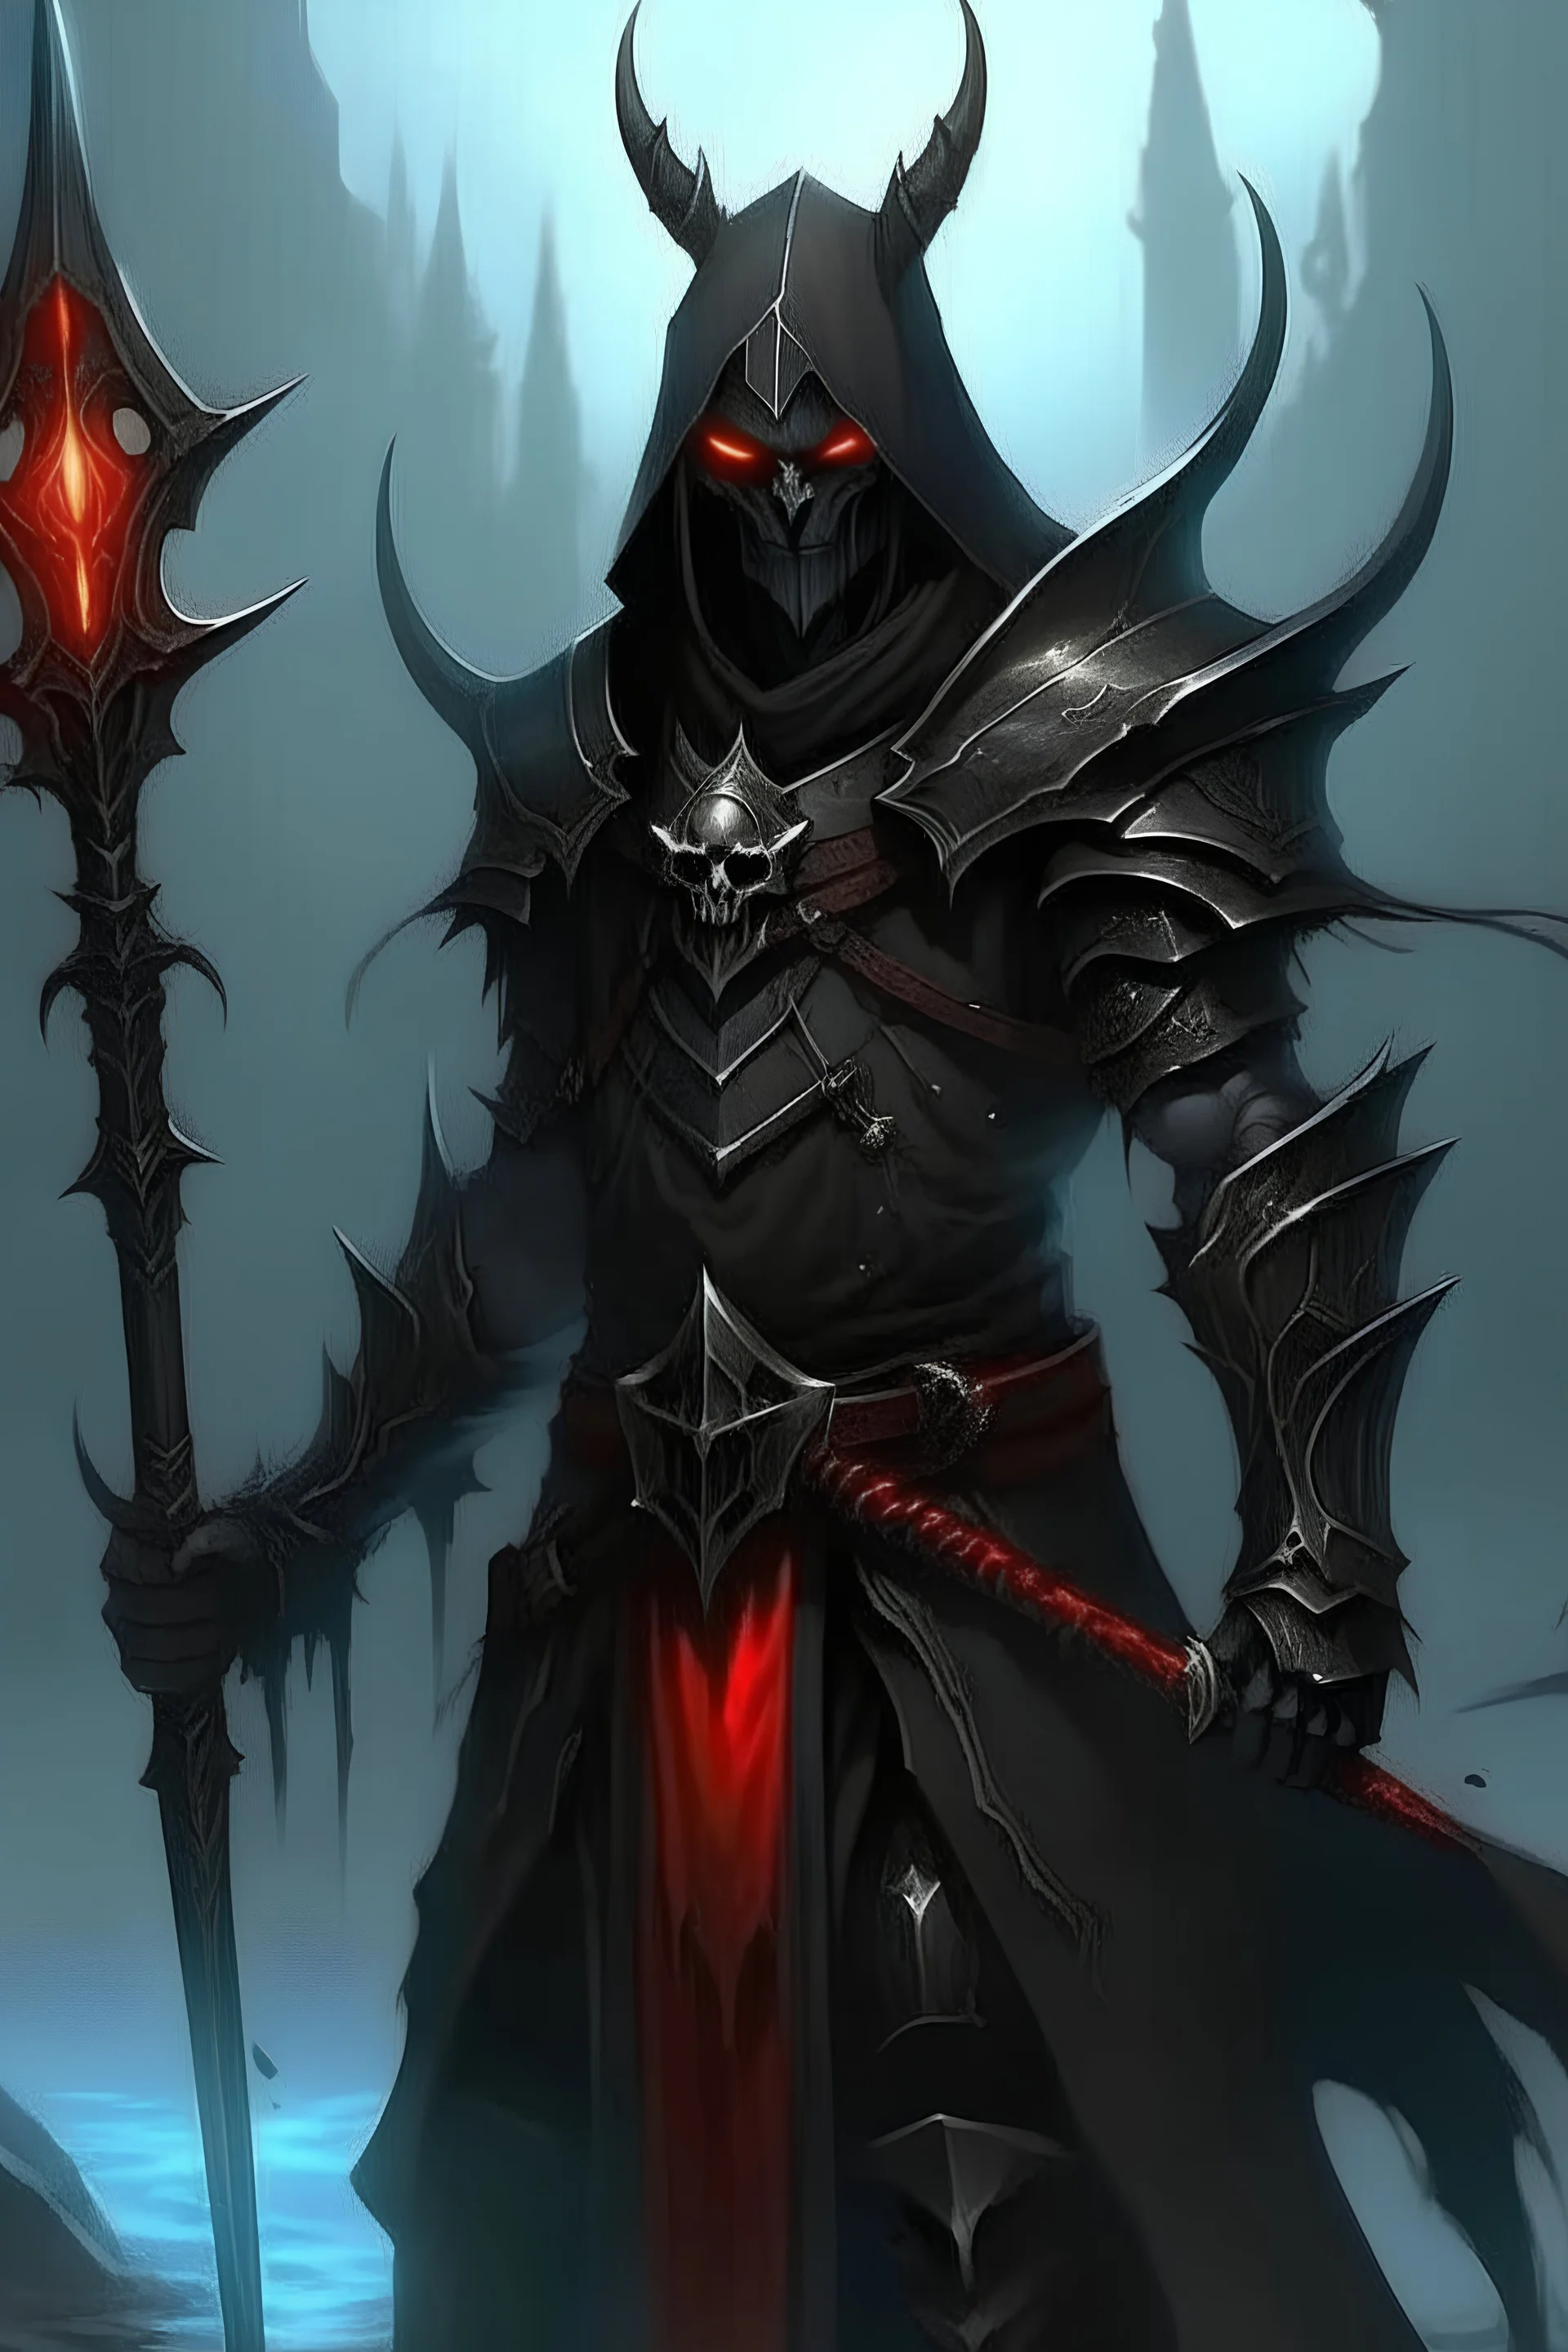 Deamon with Trident in assasin outfit